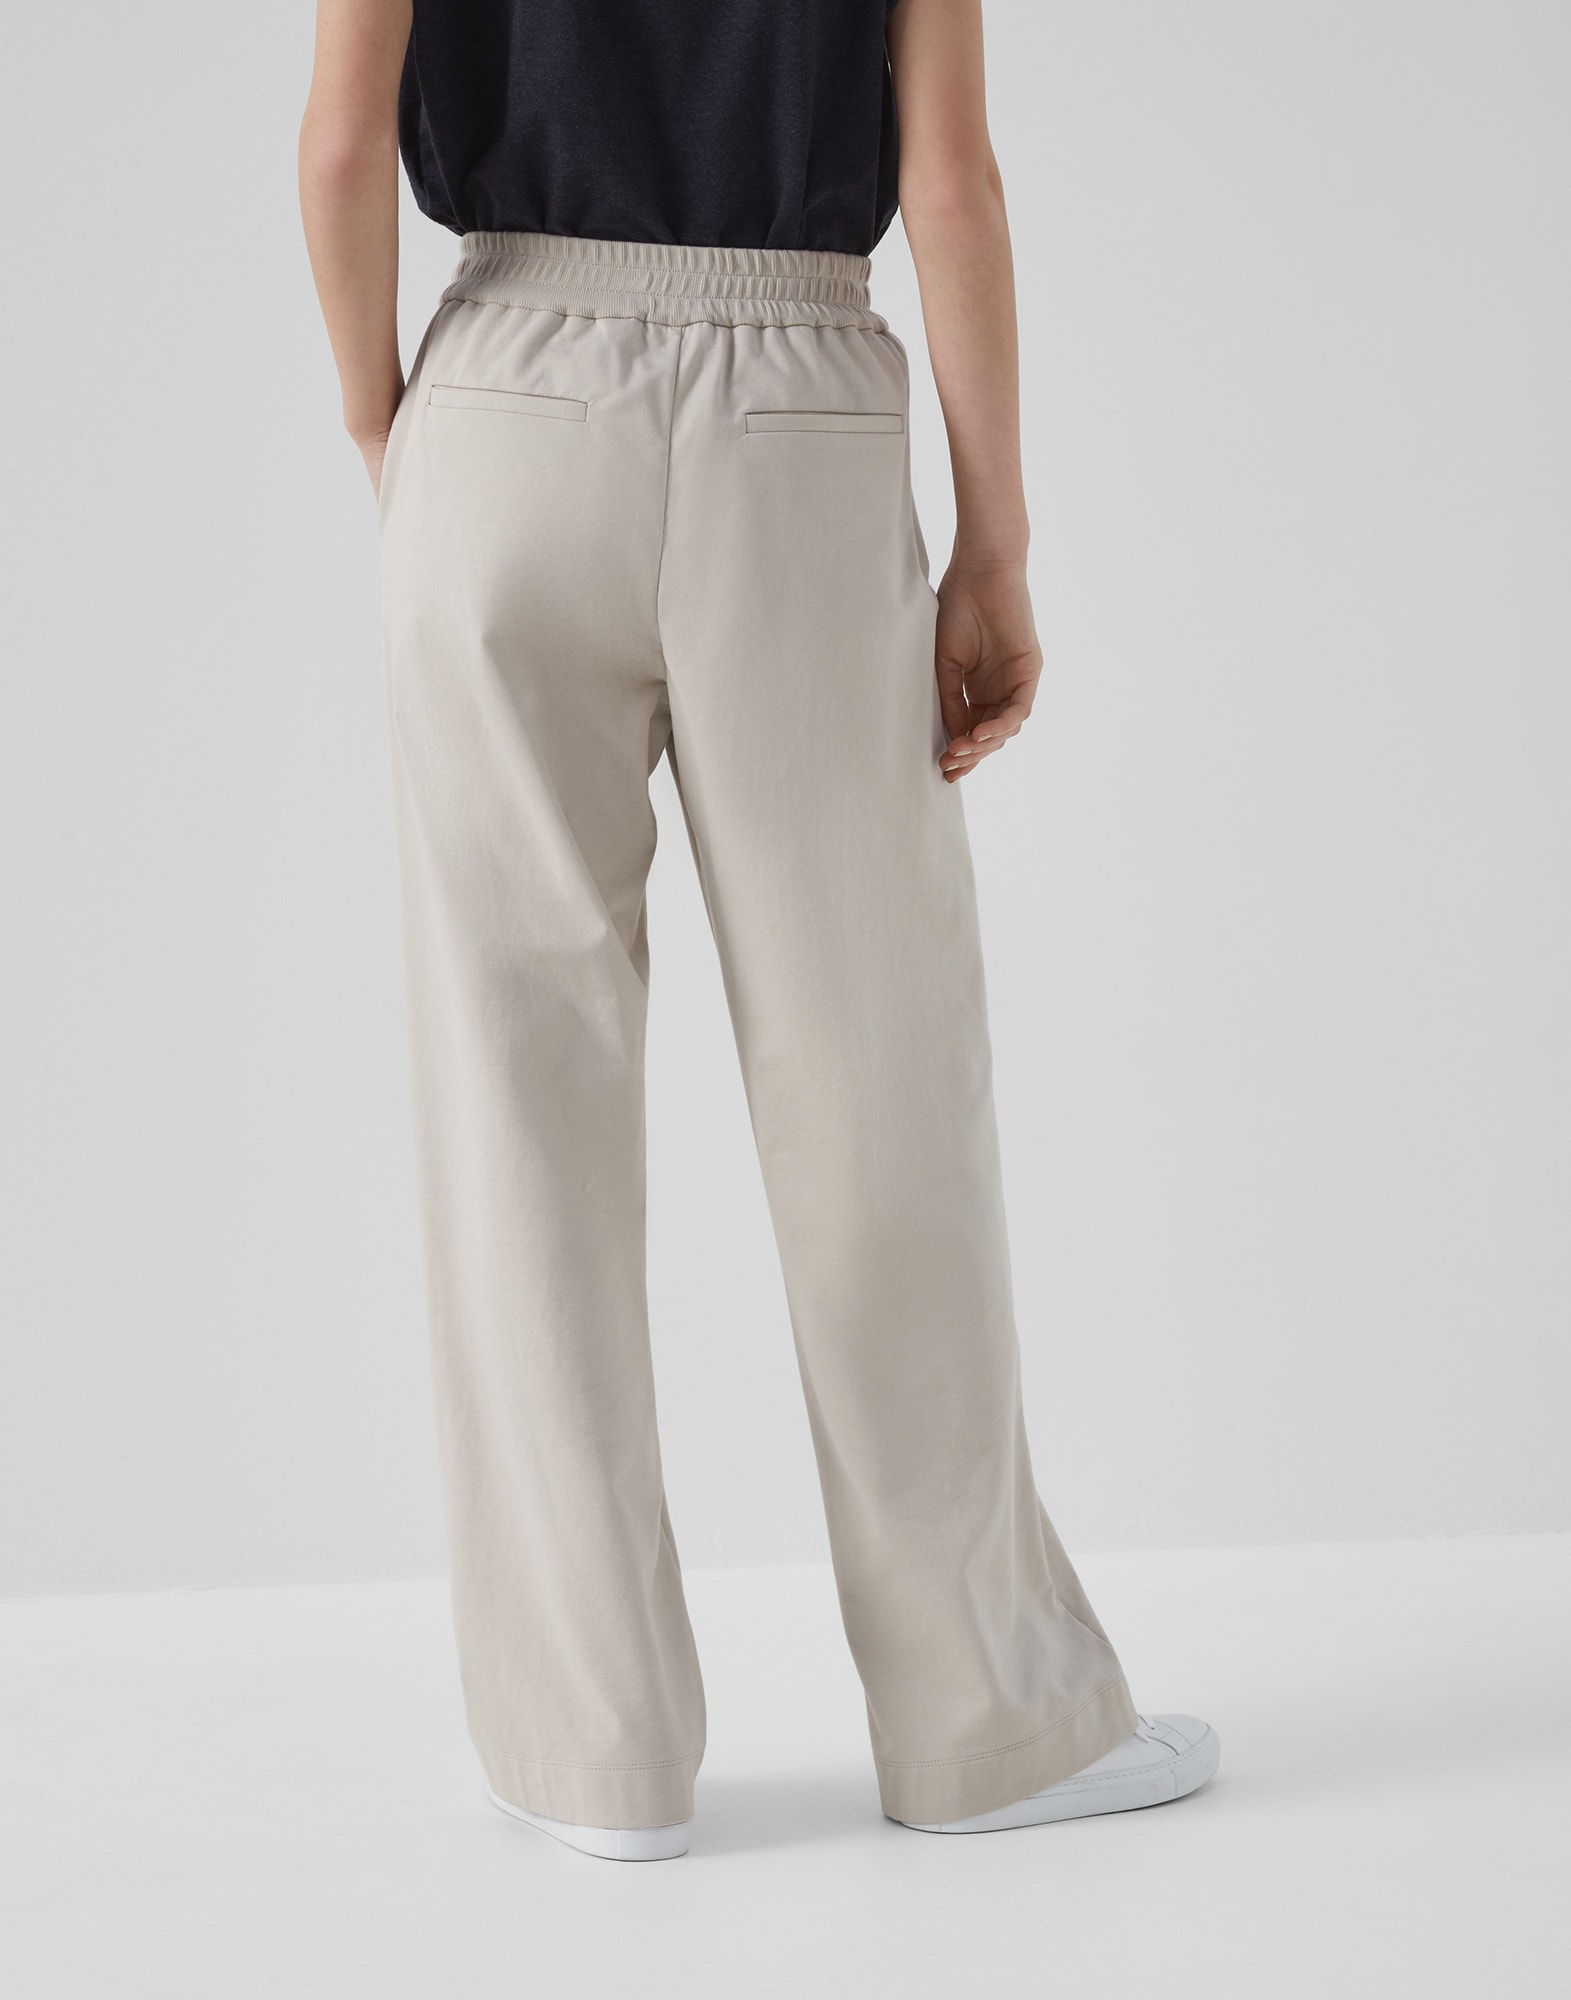 The Softest French Terry Wind Pant